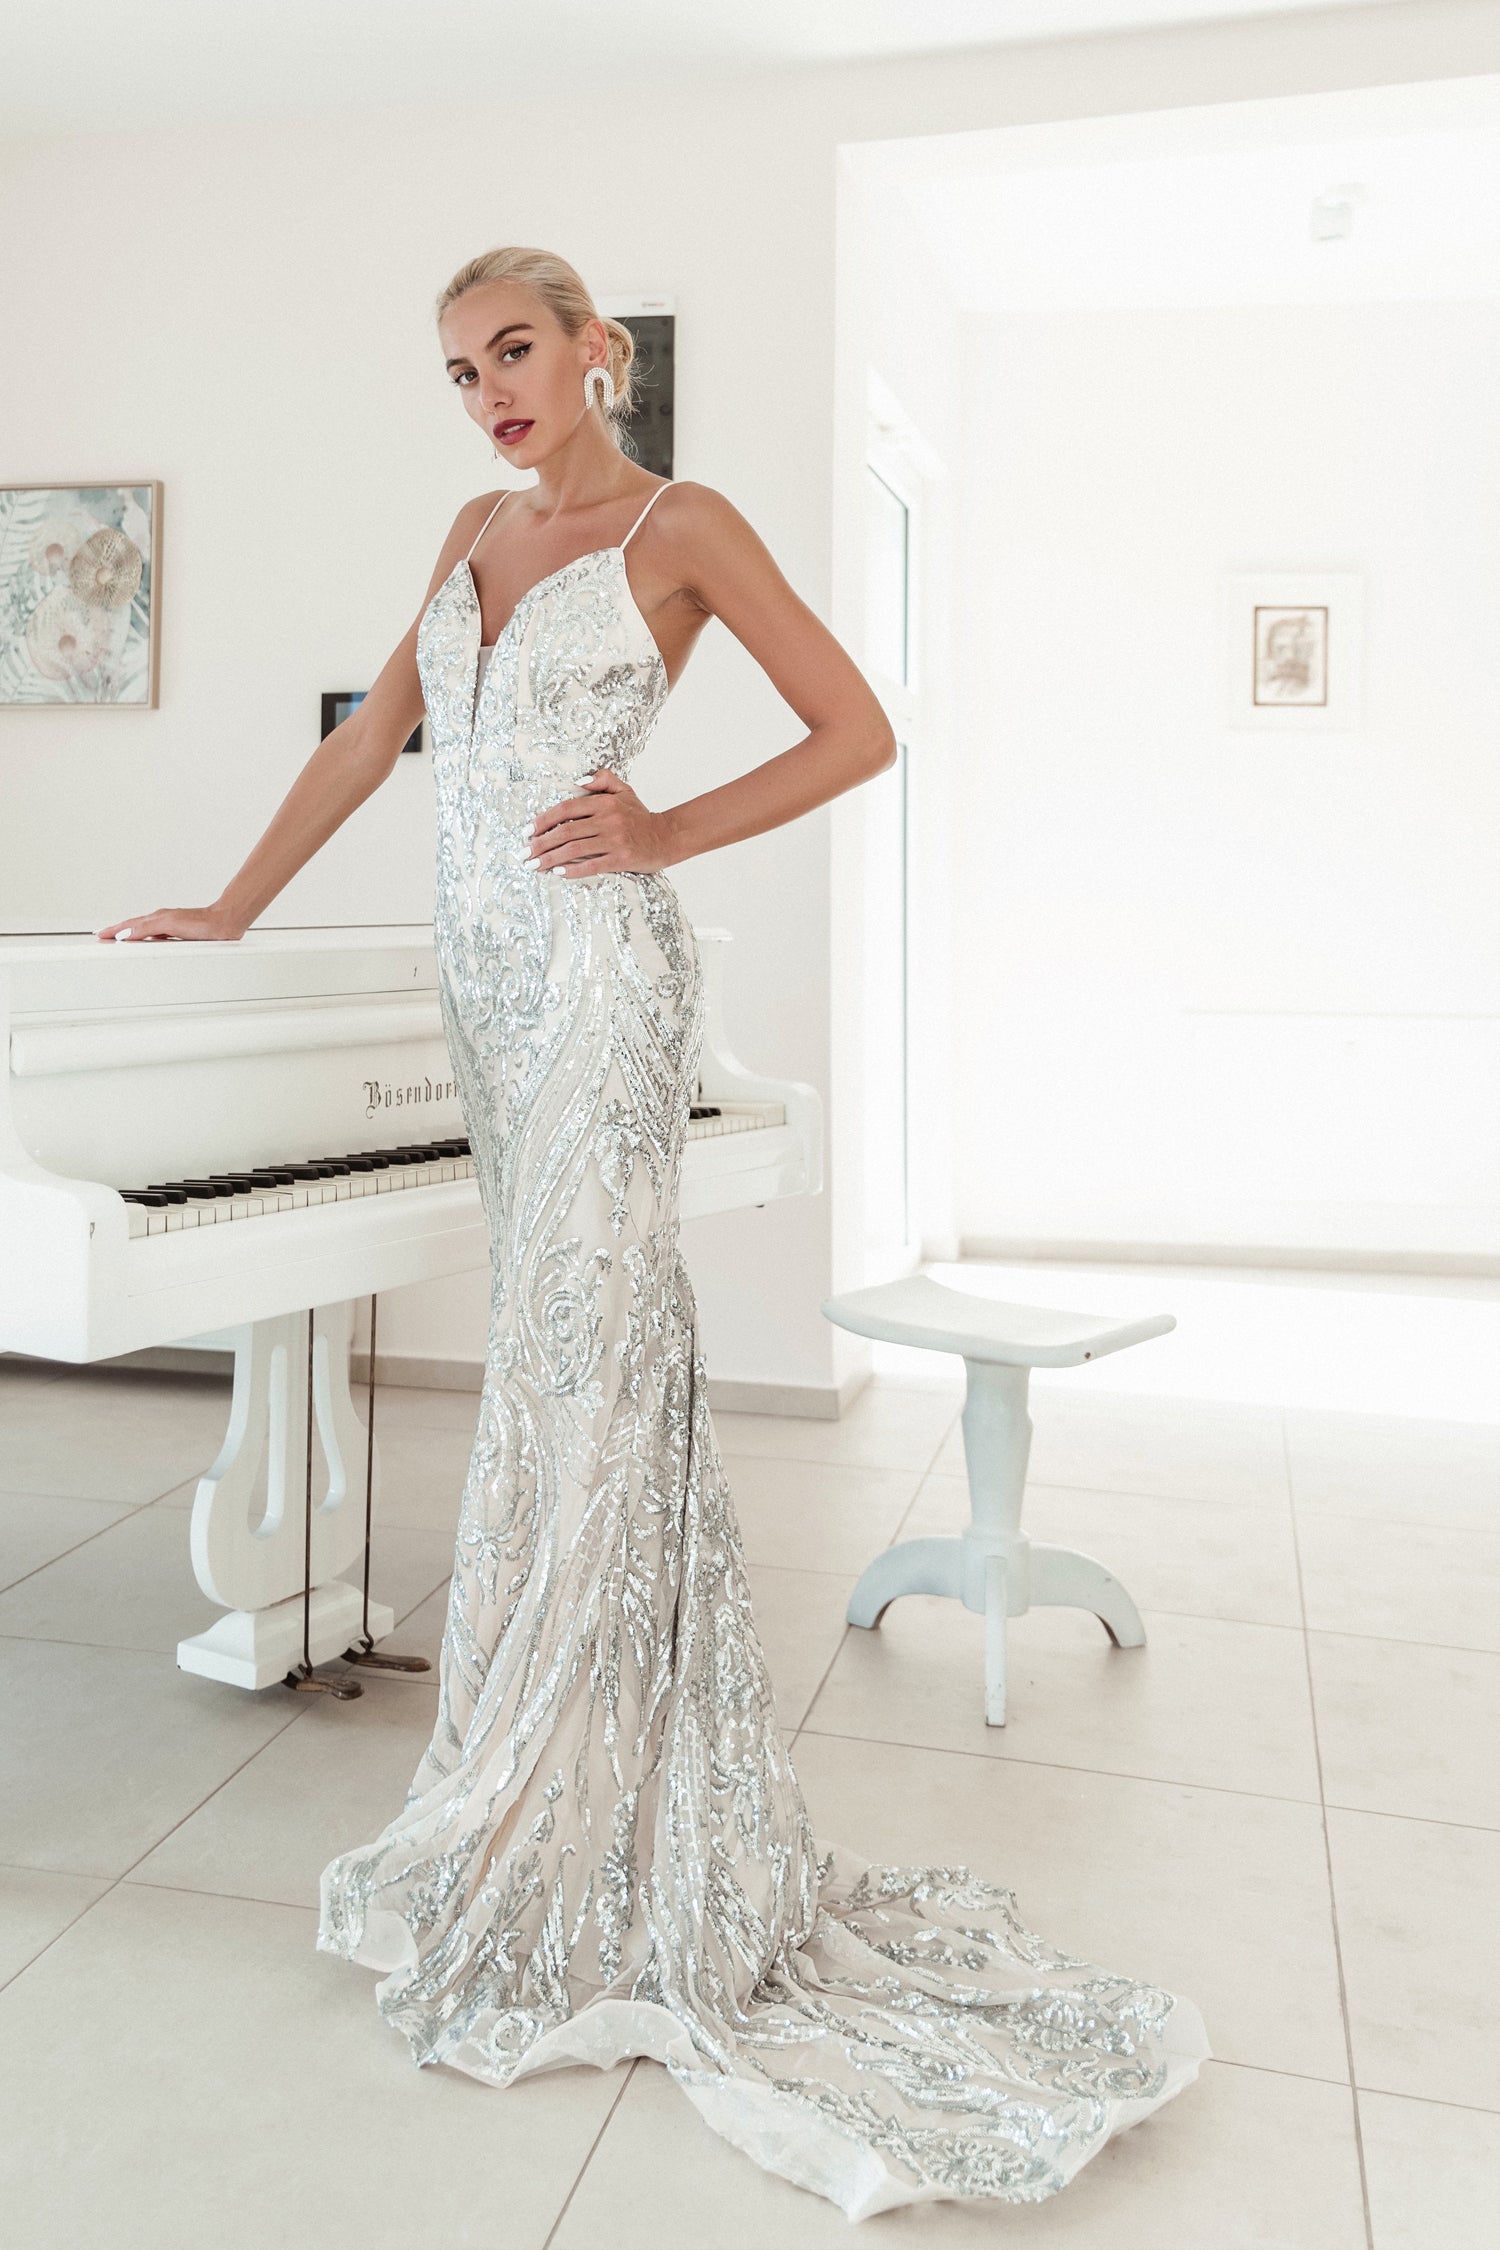 Tina Holly Couture BA666 Silver Sequin Overlay With A Deep V Neckline Mermaid Formal Dress